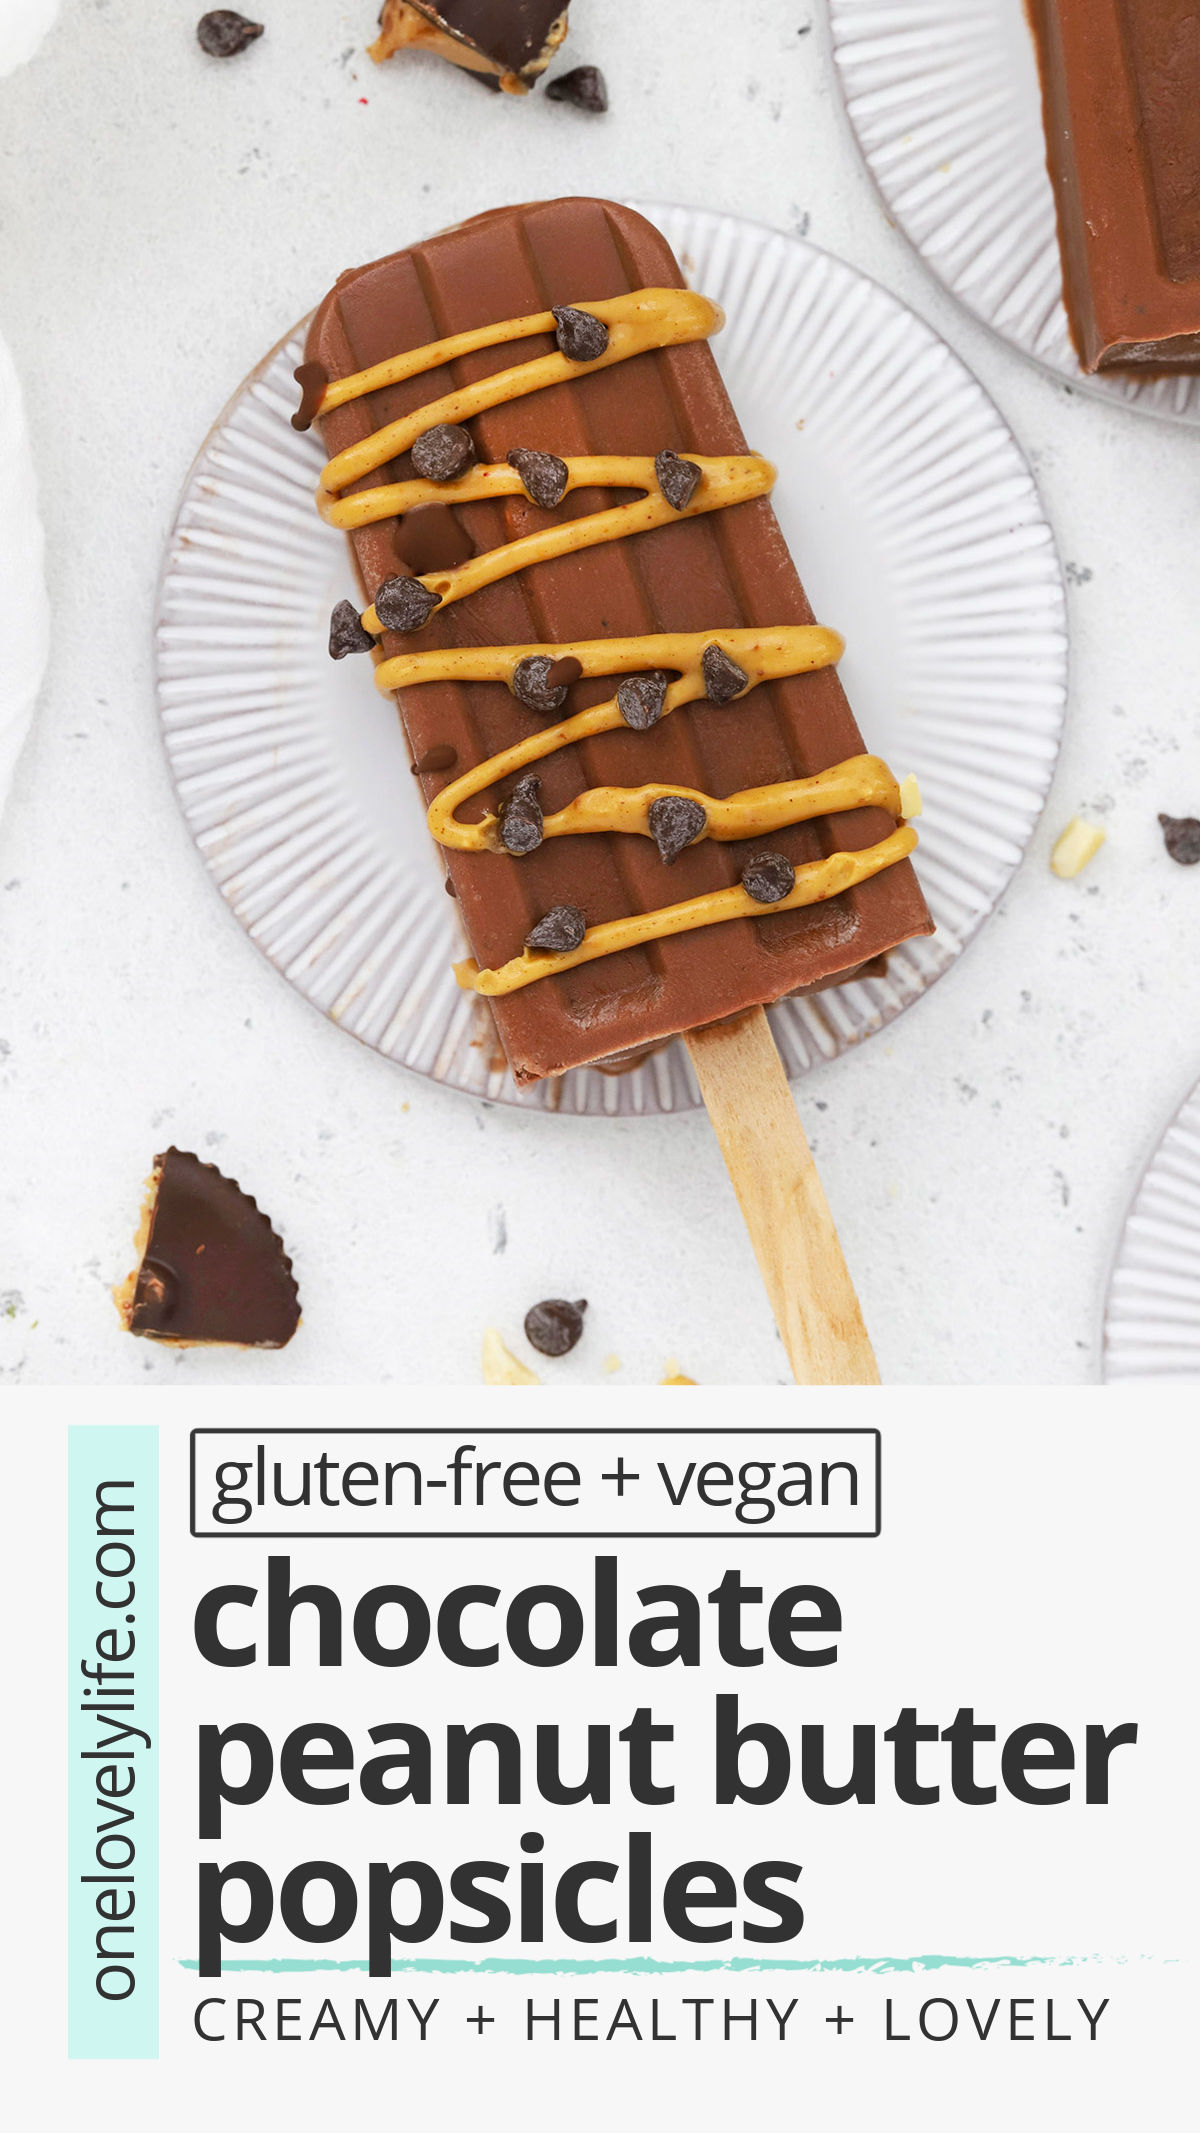 Chocolate Peanut Butter Popsicles (Vegan) - These healthy chocolate peanut butter popsicles feel like such a delicious treat! Creamy, naturally-sweetened, and totally delicious (vegan, gluten-free) // Vegan Chocolate Peanut Butter Popsicles // Chocolate Peanut Butter Banana Popsicles // Healthy Popsicle Recipe // chocolate popsicle // peanut butter fudge popsicles // peanut butter popsicles